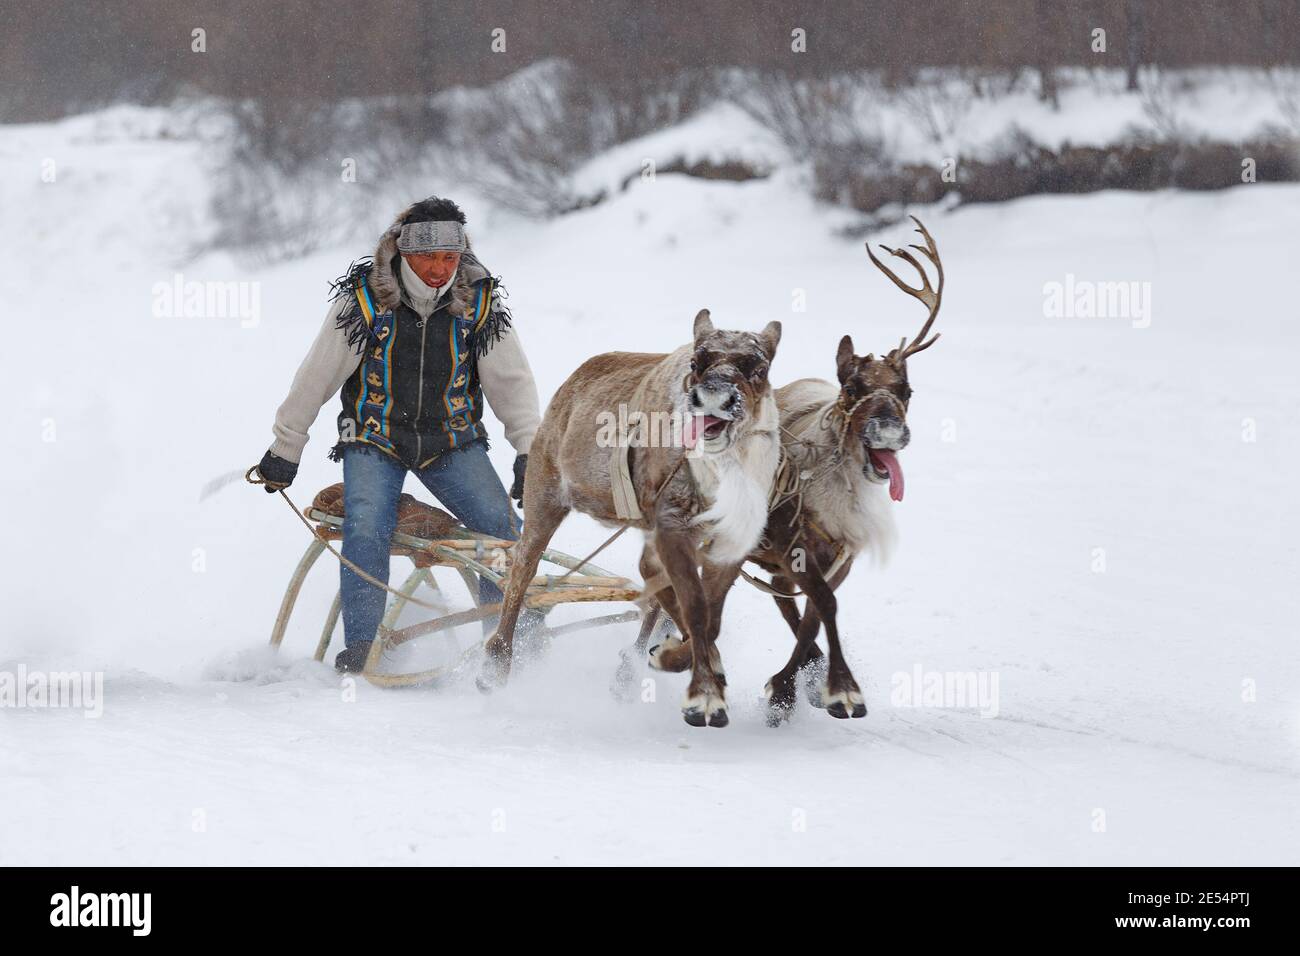 Iengra, Neryungri District, Yakutia, Russia. March 5, 2016 Evenk man in national costume rides a reindeer sleigh Stock Photo